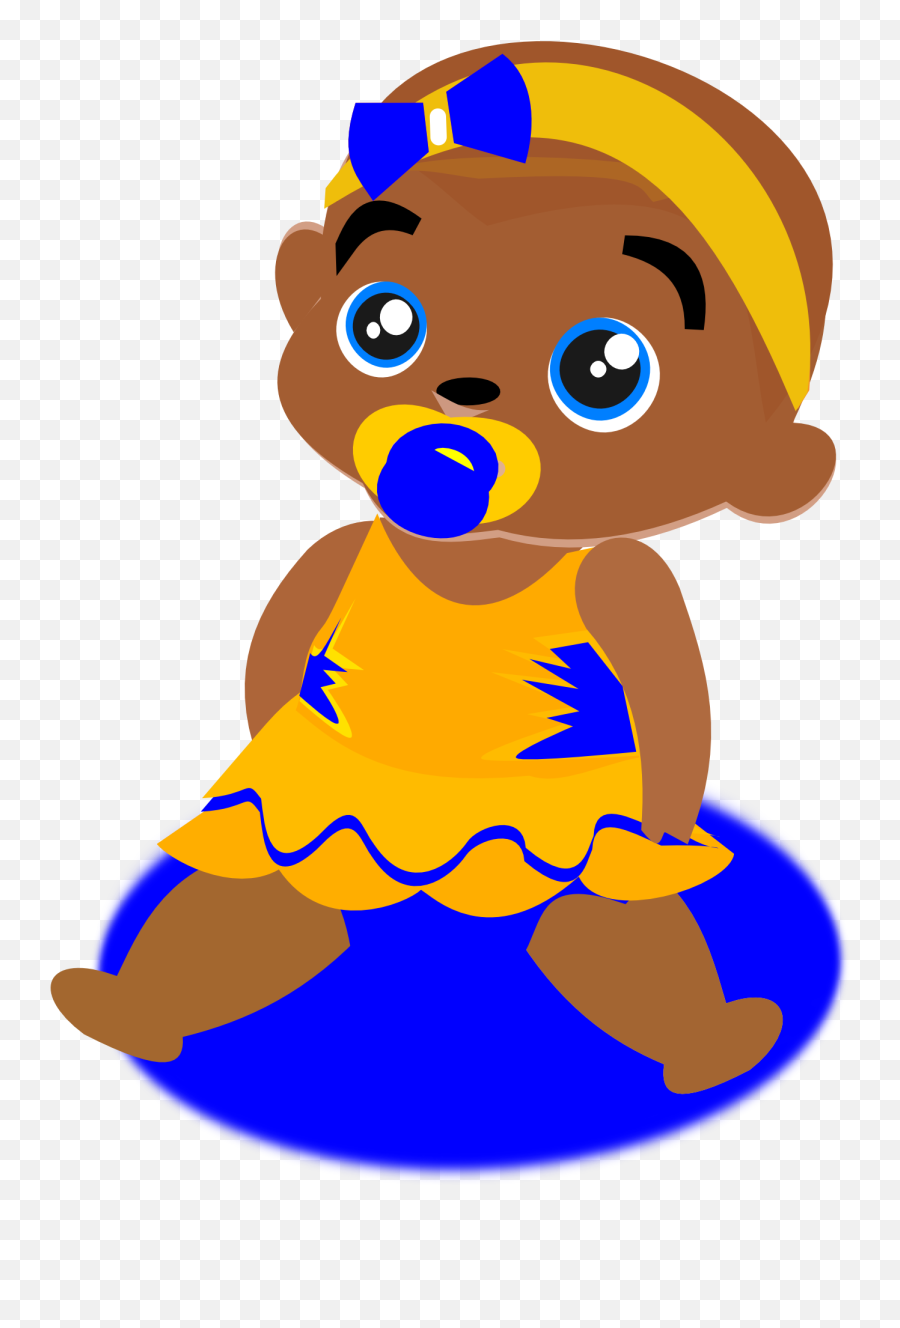 Baby With The Soother And Colorful Dress Clipart - Clip Art African Baby Boy Emoji,Dress Clipart